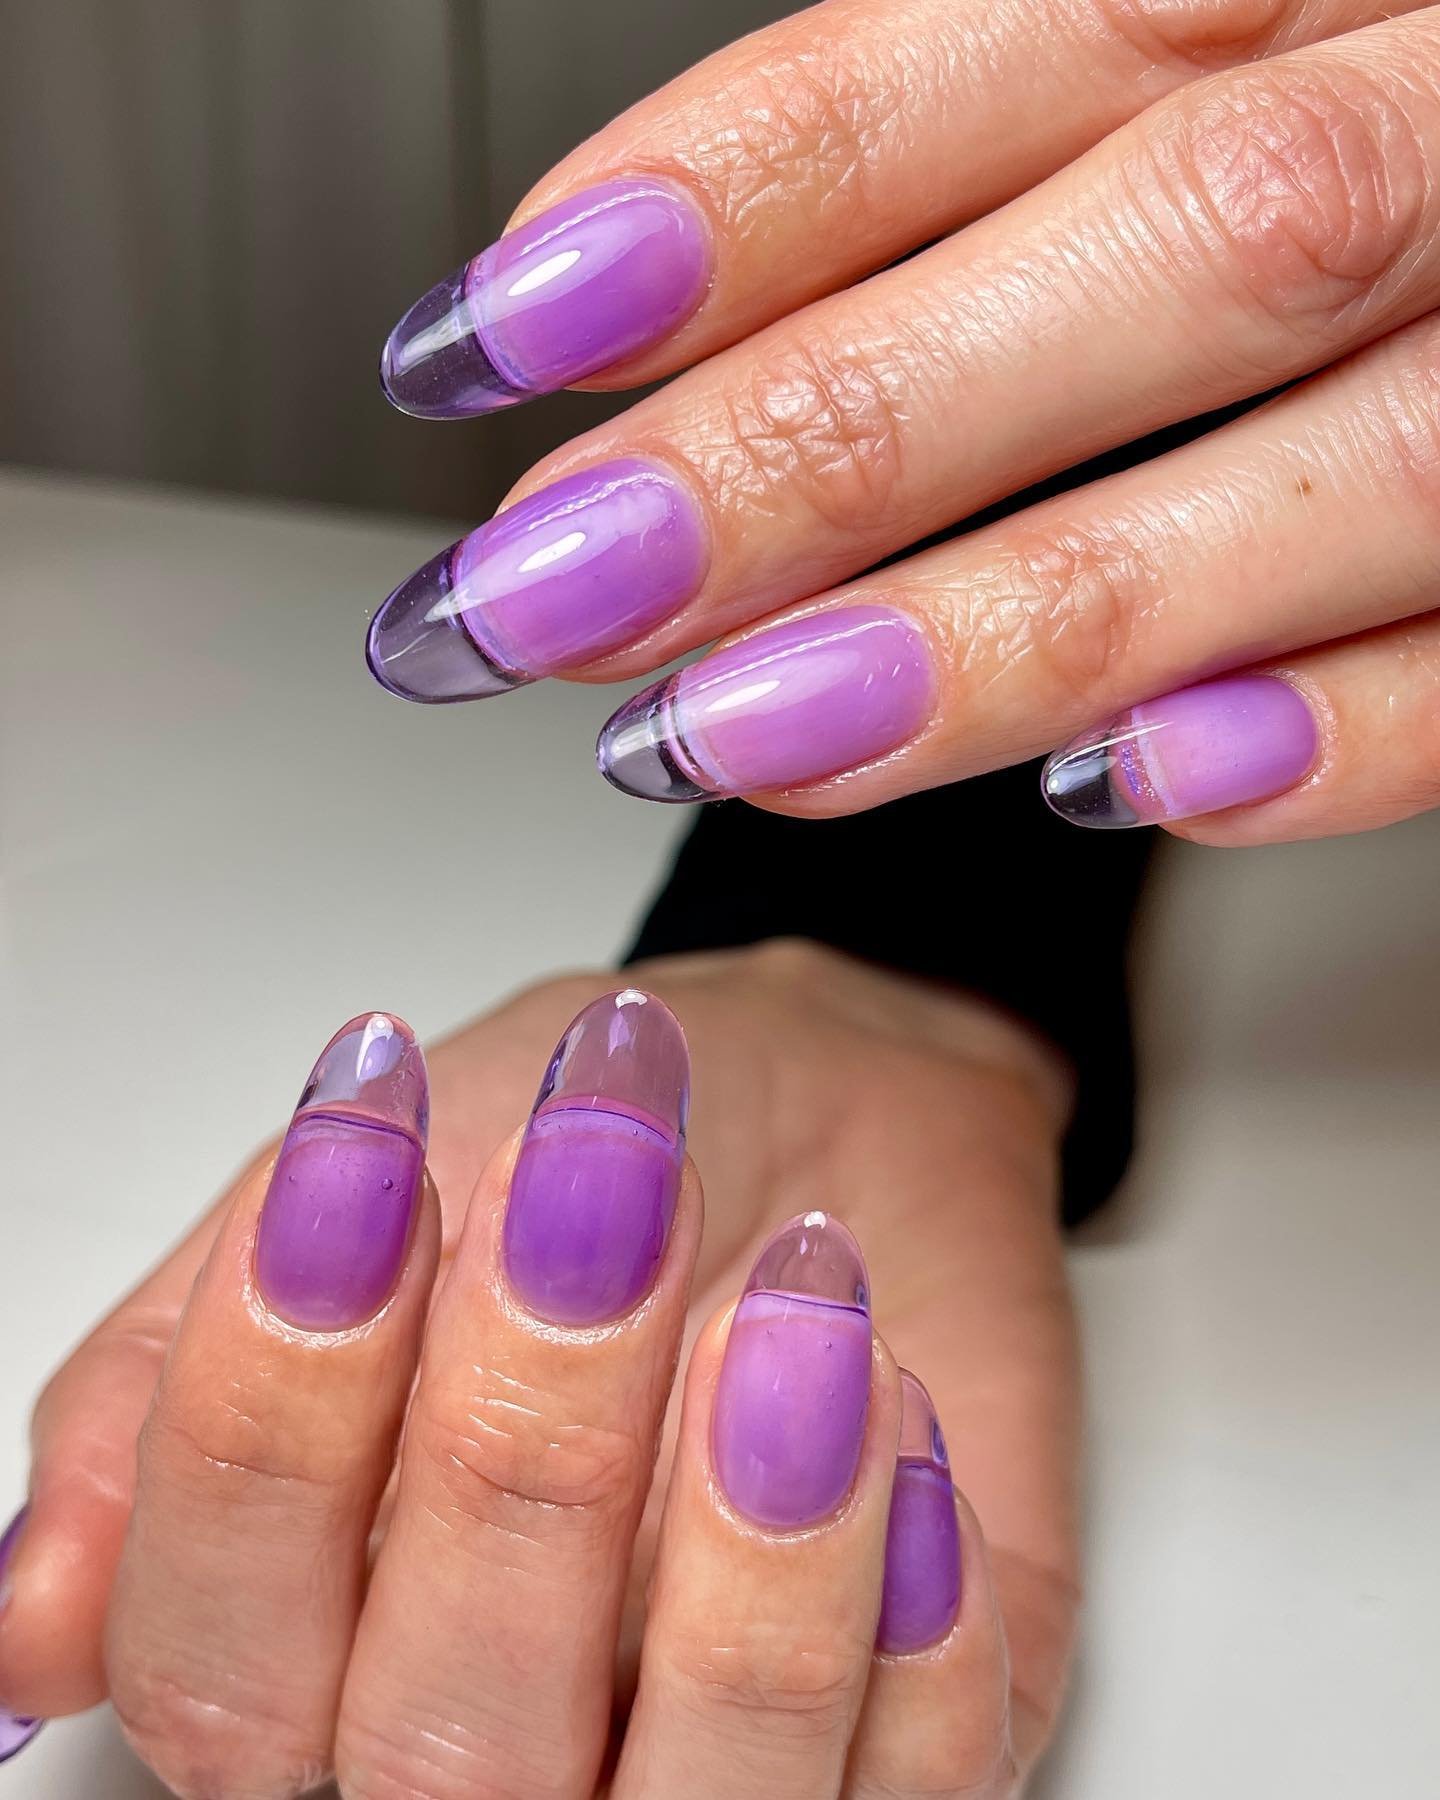 27 - Picture of Jelly Nails